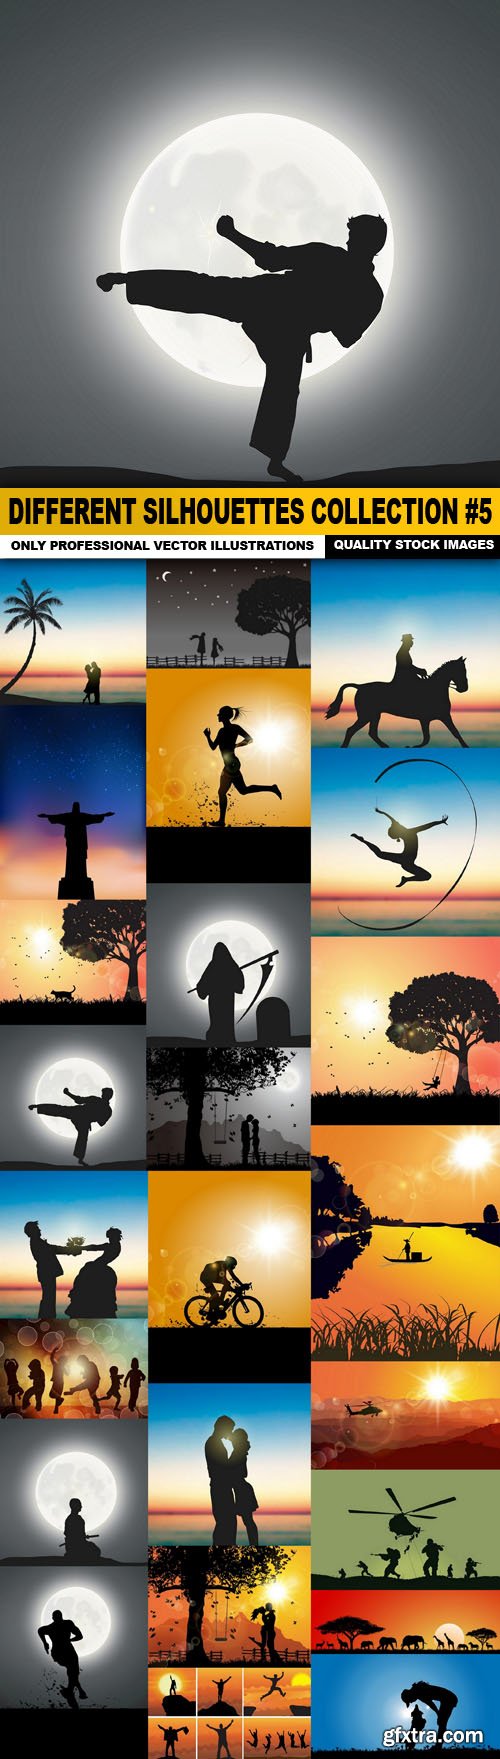 Different Silhouettes Collection #5 - 25 Vector